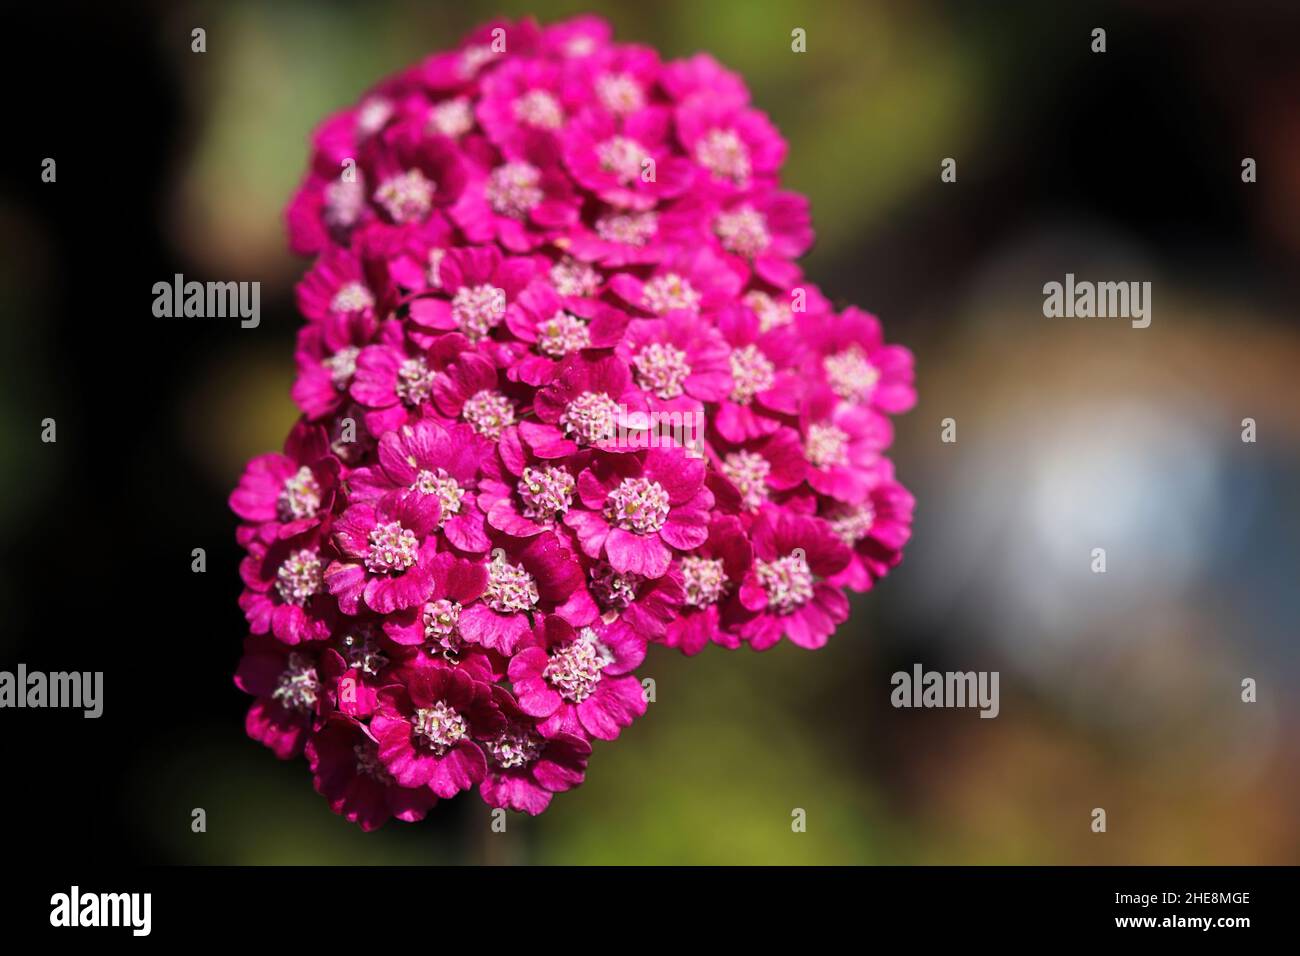 Top view of pink flowers on an Achillea Yarrow plant Stock Photo